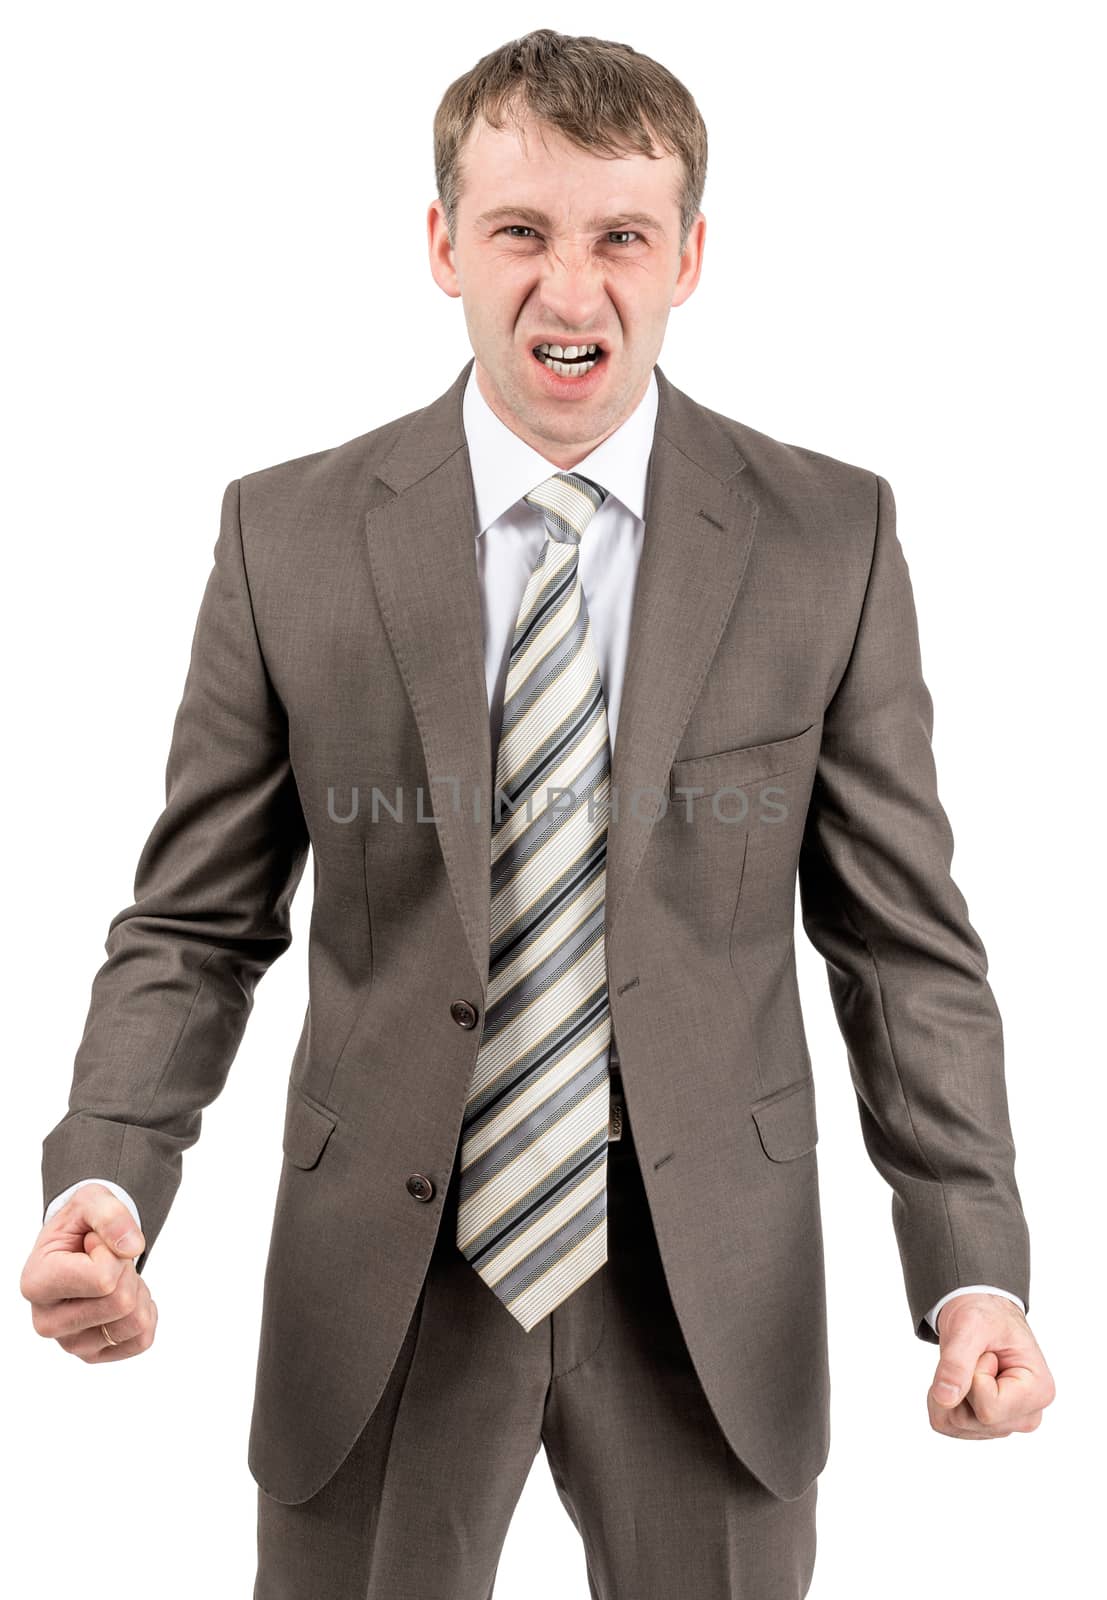 Angry businessman looking at camera isolated on white background